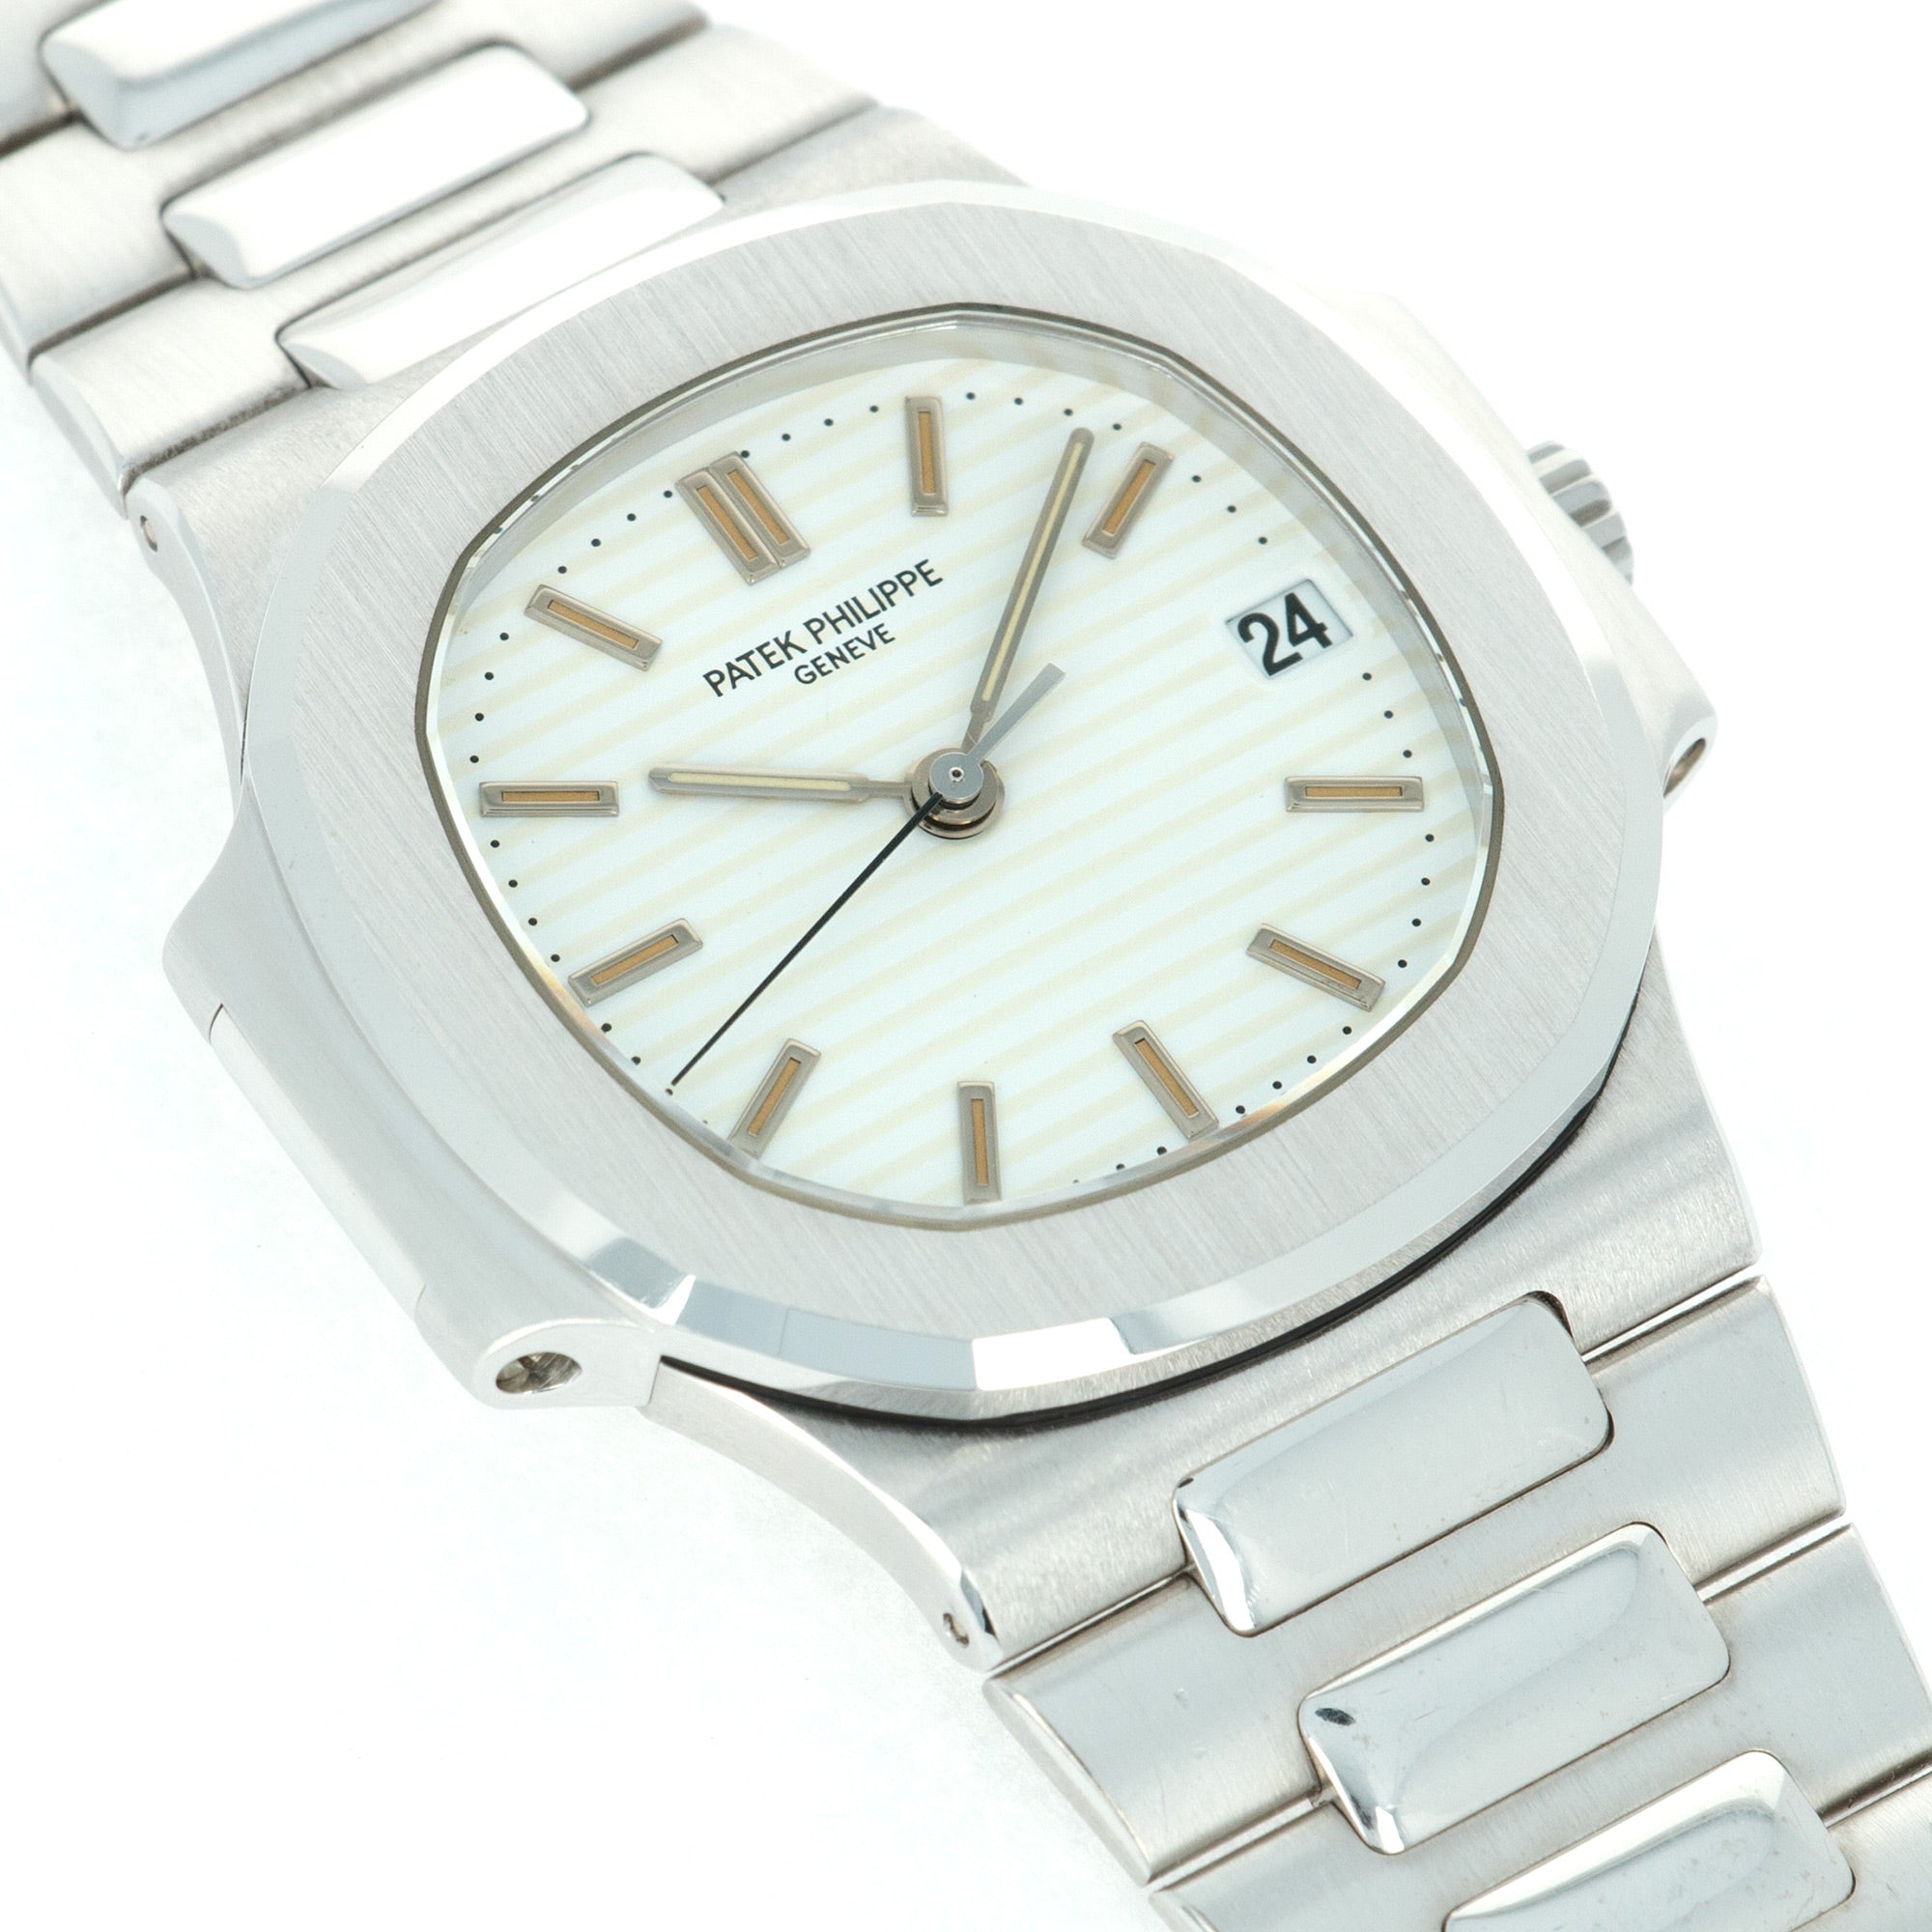 Patek Philippe - Patek Philippe White Gold Nautilus Ref. 3800 in Top Condition - The Keystone Watches